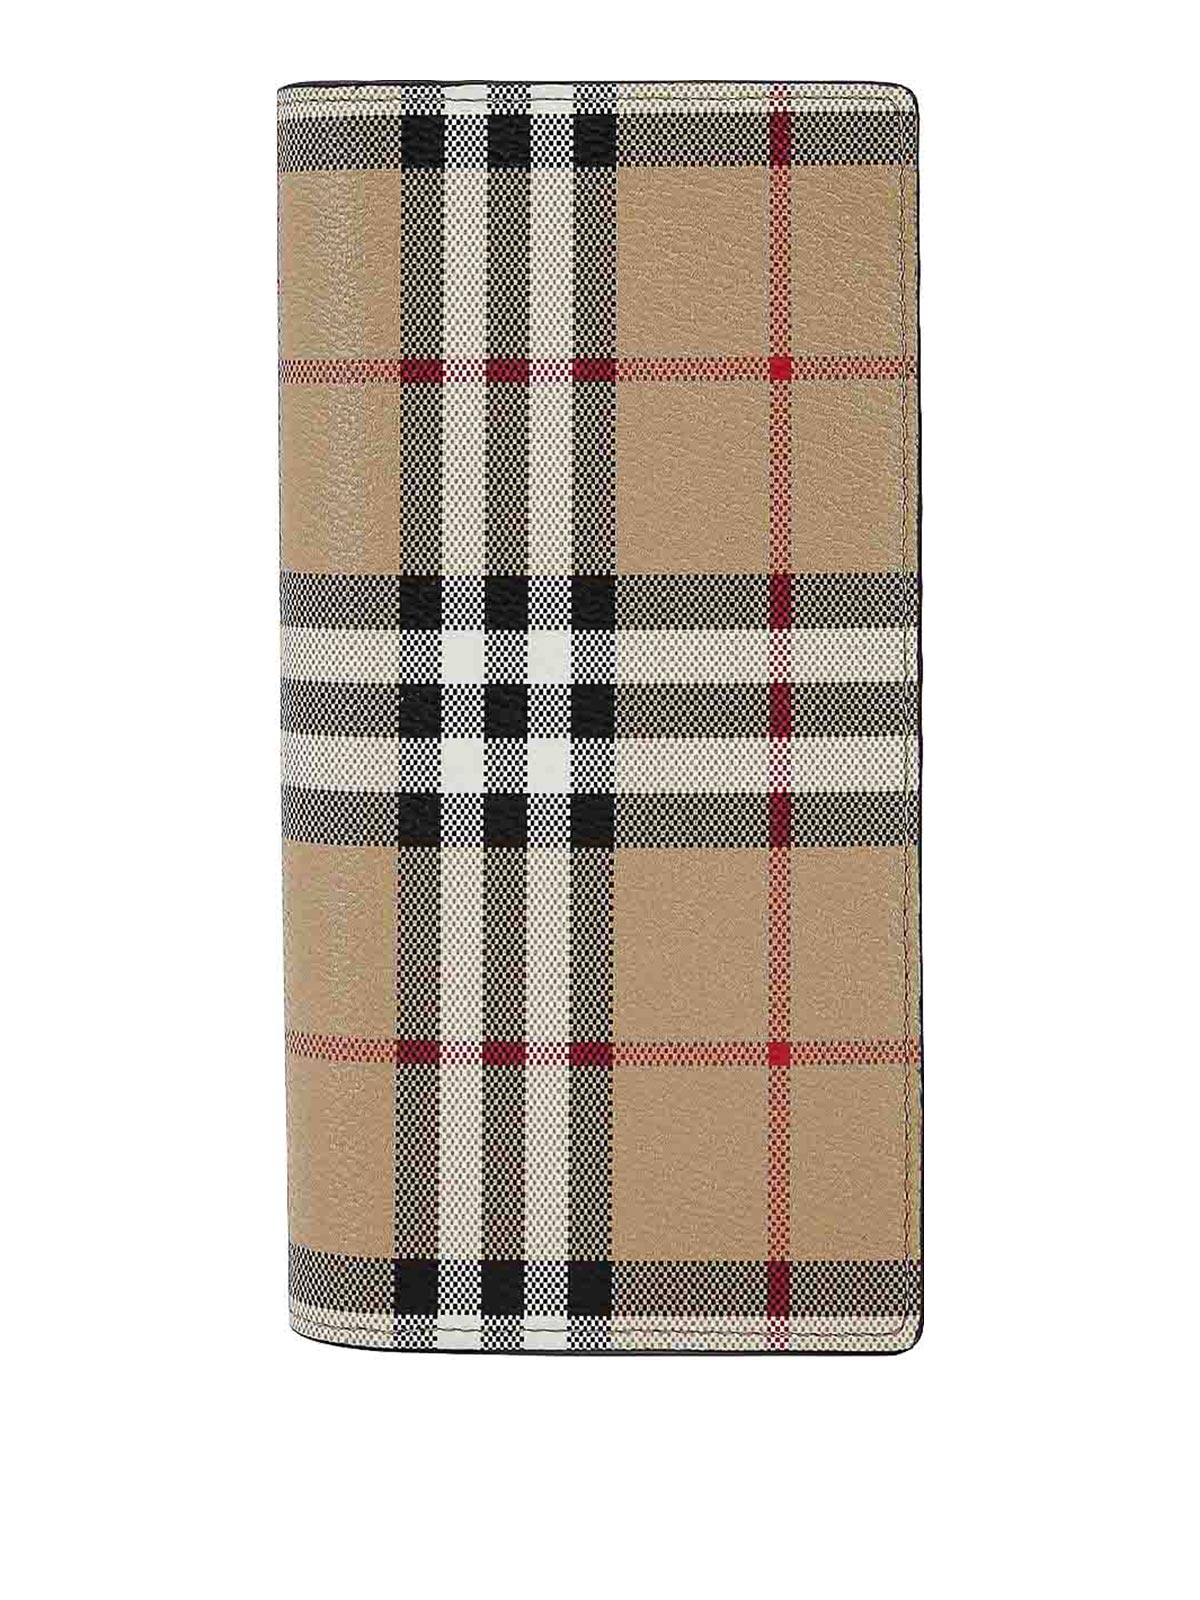 Burberry Coated Canvas Wallet With Check Motif In Brown